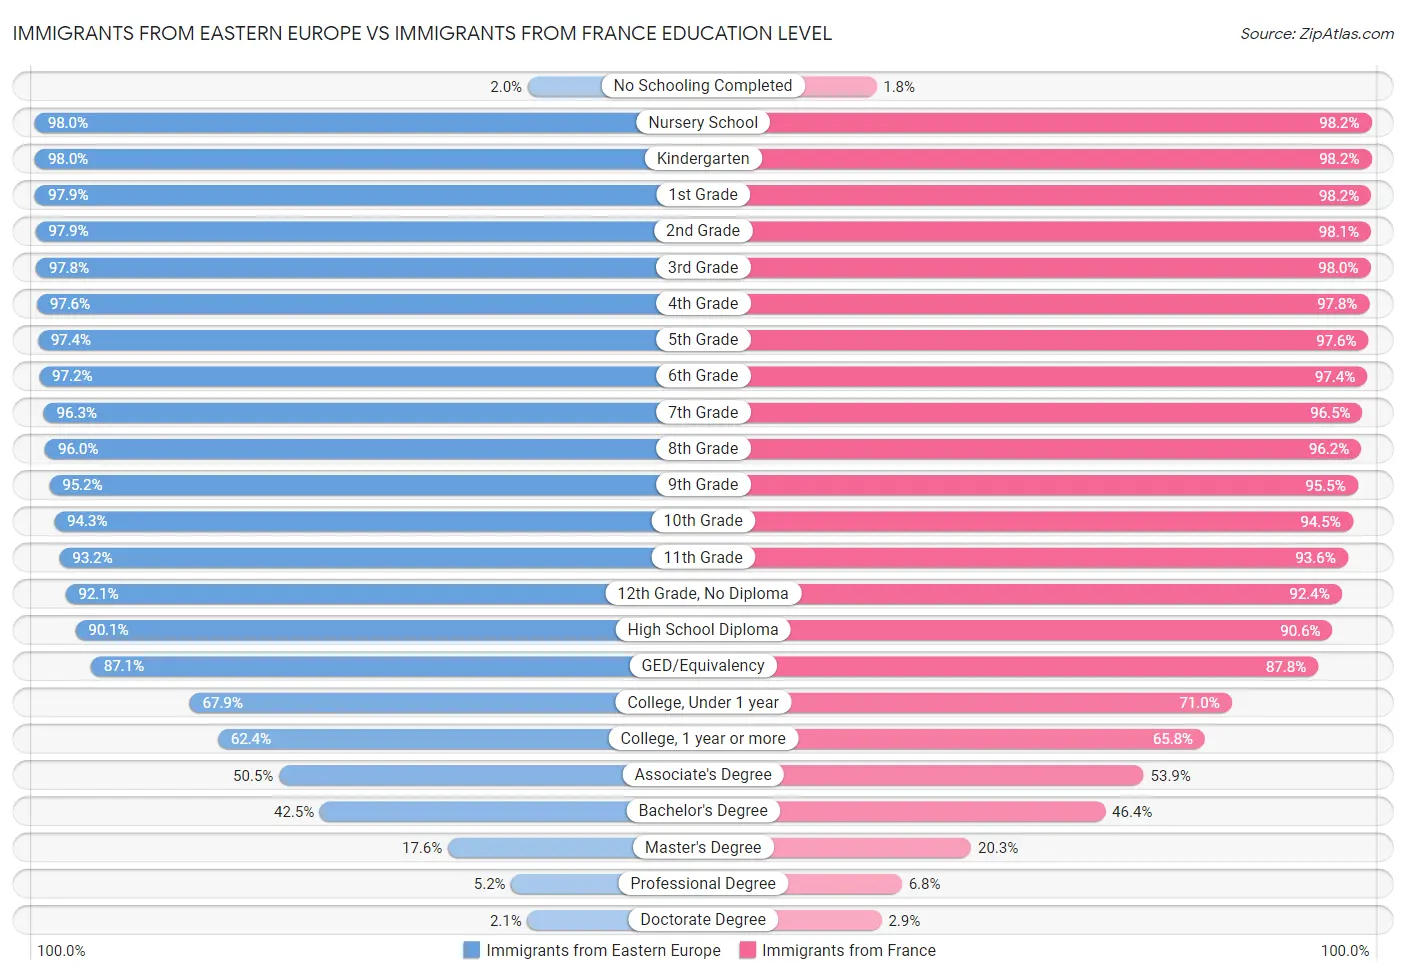 Immigrants from Eastern Europe vs Immigrants from France Education Level